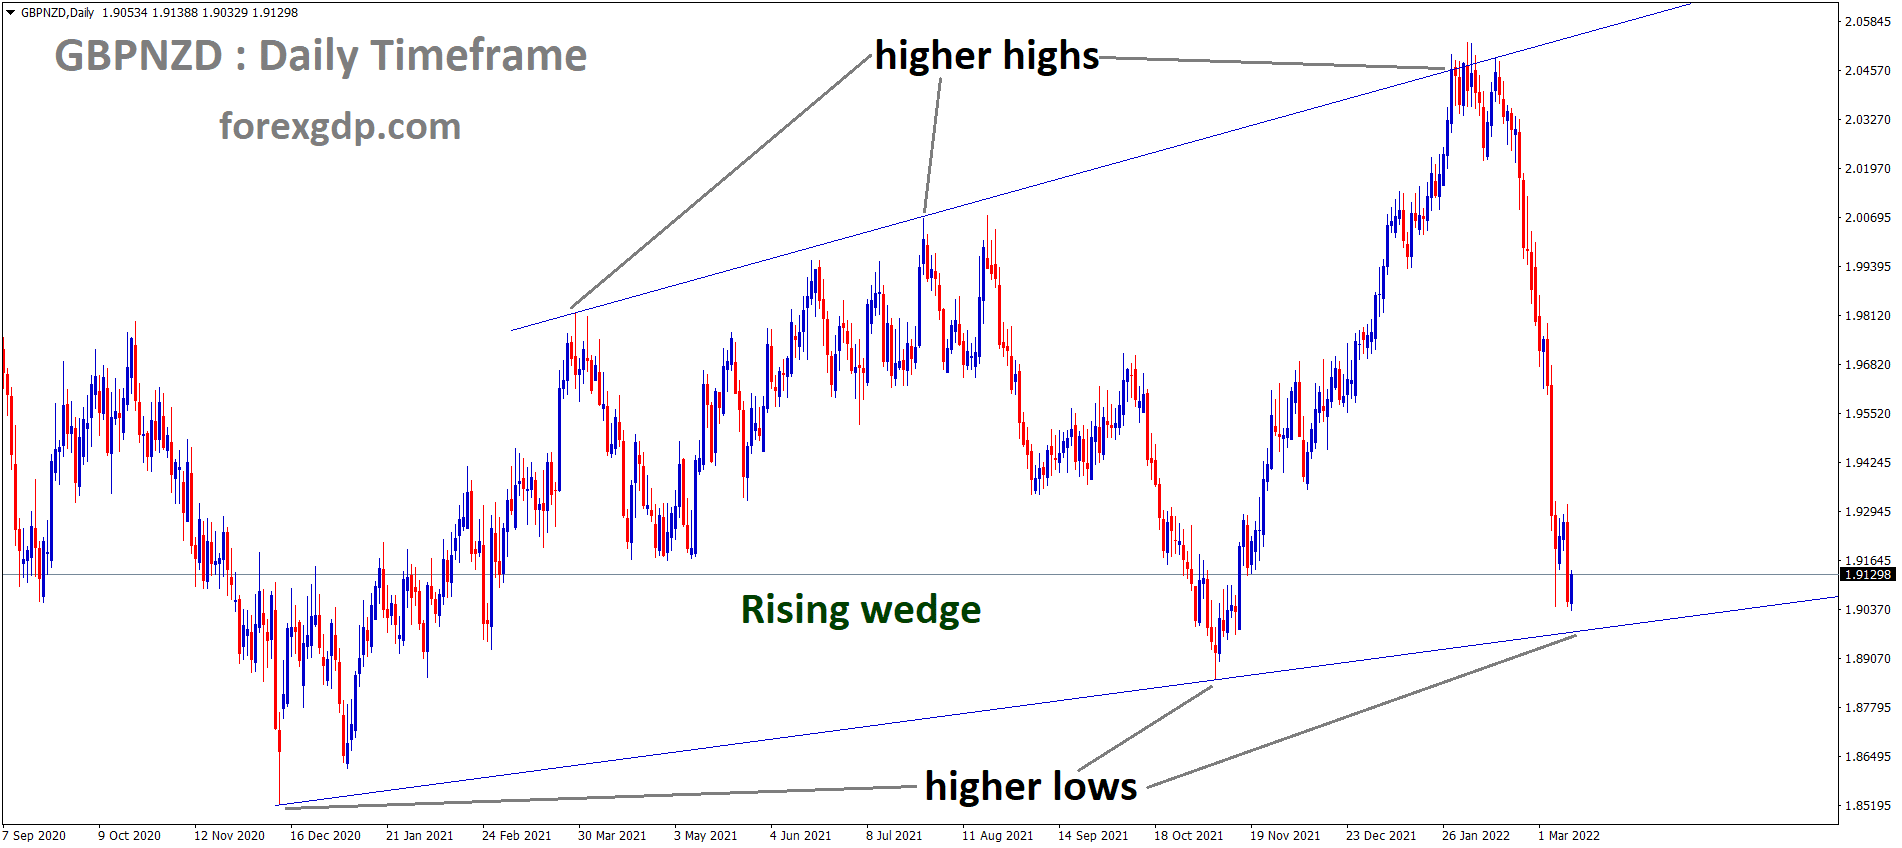 GBPNZD is moving in the Rising wedge pattern and the market has reached the higher low area of the pattern